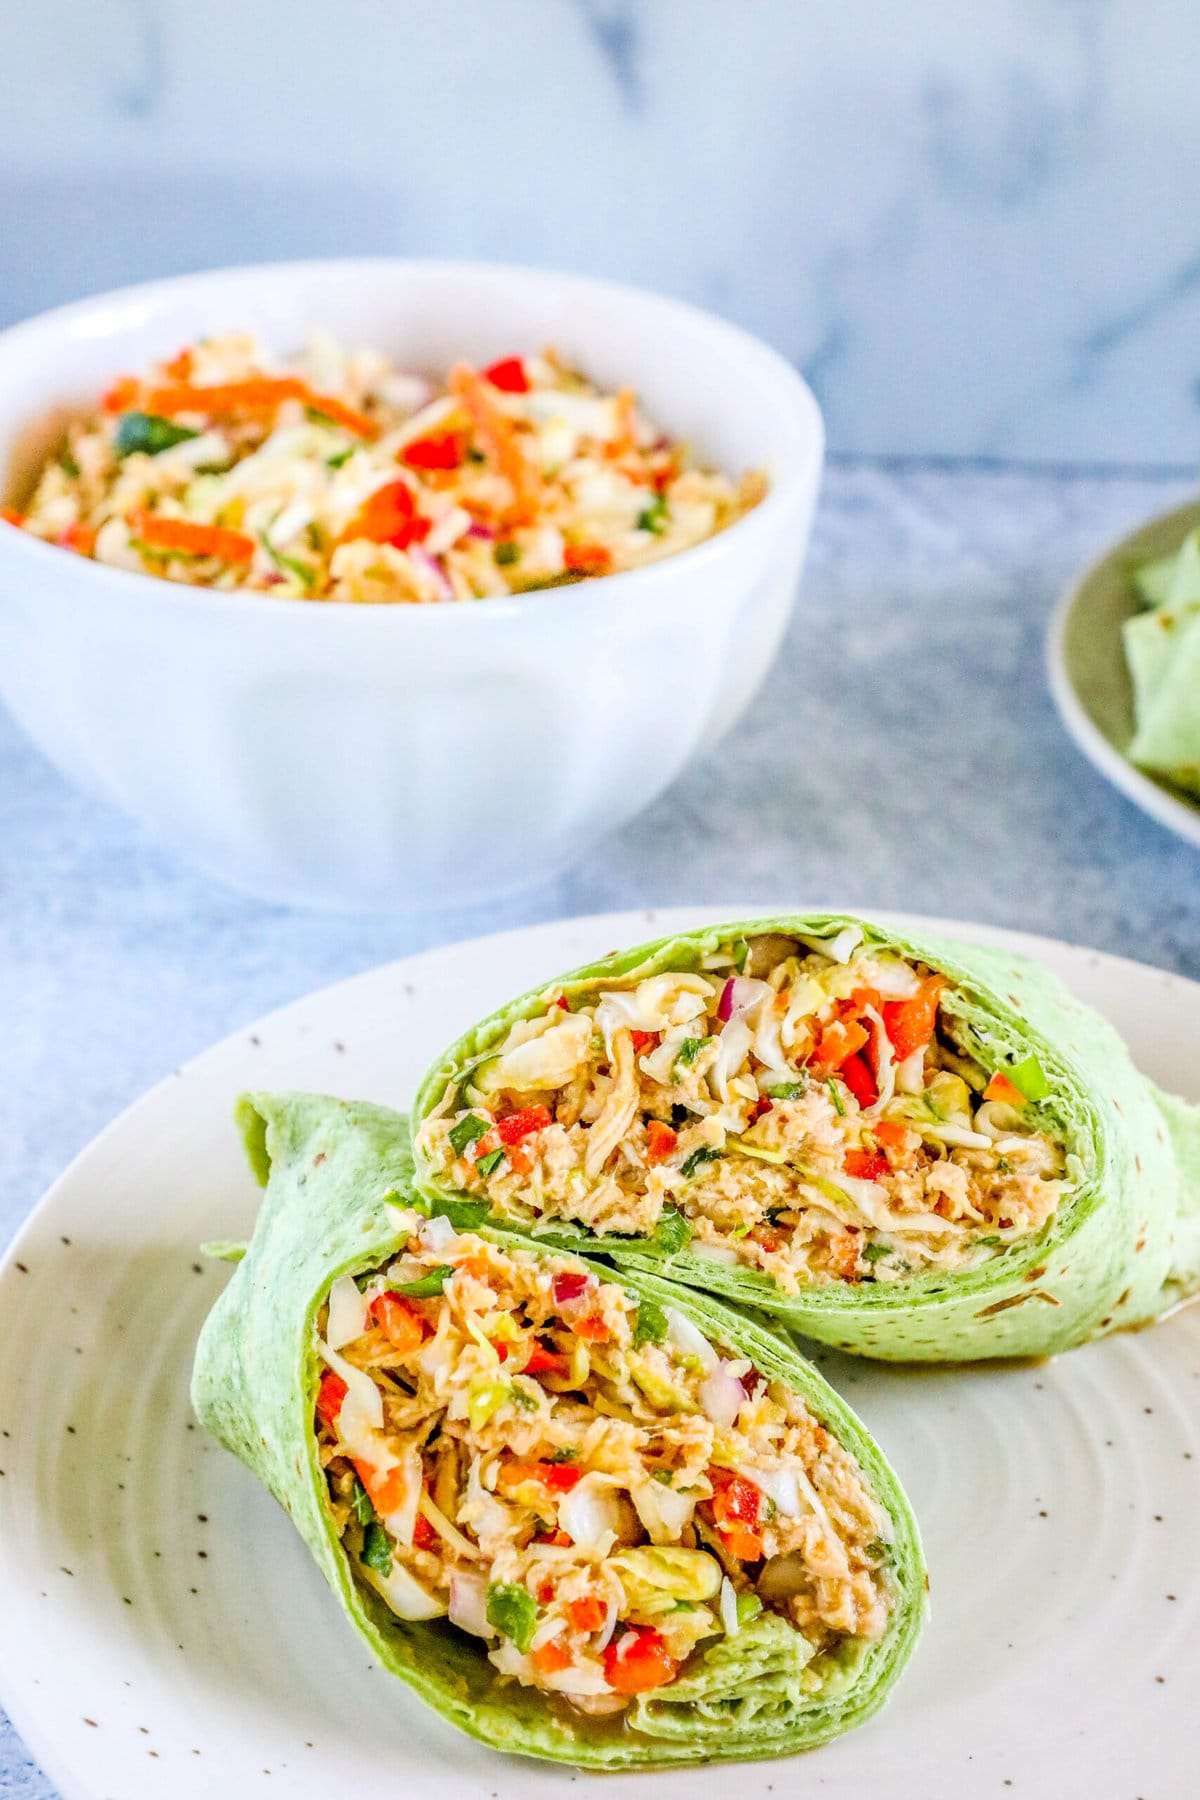 chicken salad with shredded chicken, cabbage, and diced vegetables wrapped in a green tortilla sliced in half on a plate